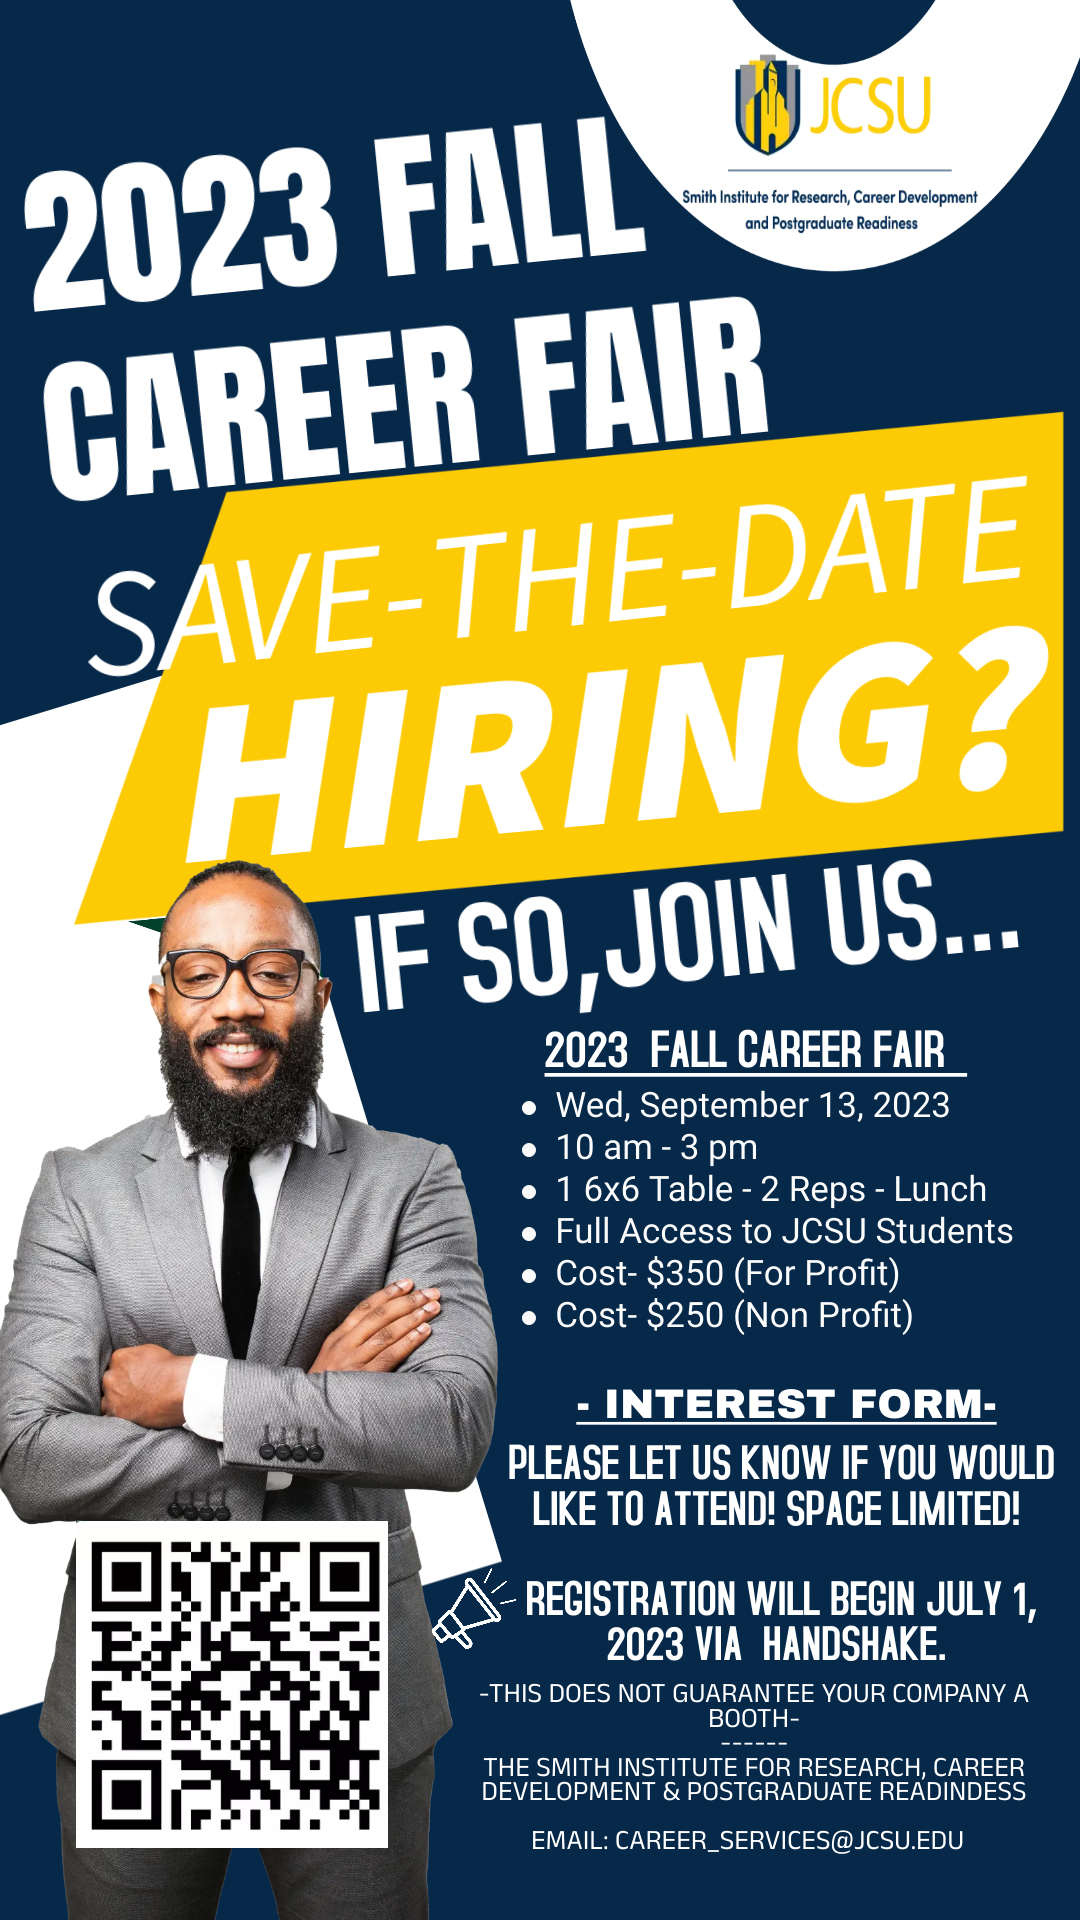 Graphic for hiring fair - 2023 FALL CAREER FAIR SAVE THE DATE Hiring?   If so, join us for our 2023 Fall Career Fair on Wednesday, September 13, 2023 from 10 a.m. - 3 p.m.  ∙ 1 6x6 Table - 2 representatives - Lunch ∙ Full access to JCSU Students ∙ Cost - $350 (for-profit) ∙ Cost - $250 (non-profit)  Registration will begin July 1, 2023 via Handshake.  Fill out the interest form if you would like to attend. Space is limited.   For more information, email: career_services@jcsu.edu